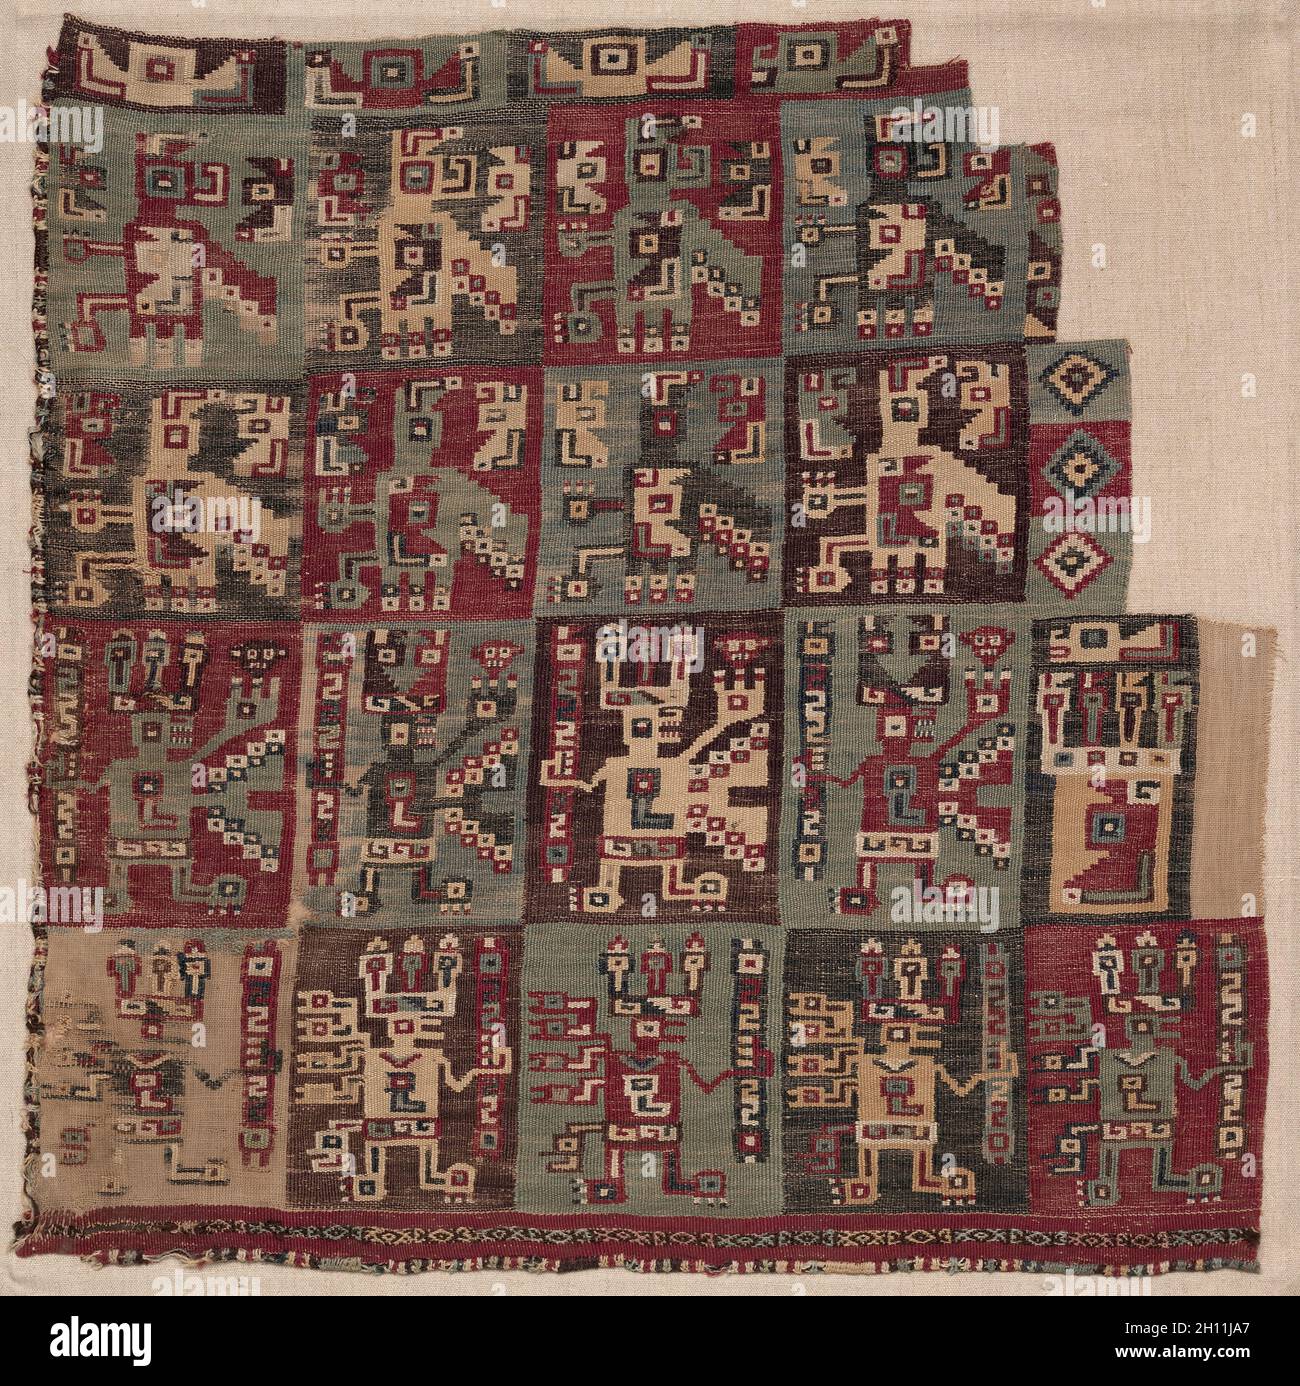 Mantle Corner Fragment, 700-1100 A.D.. Peru, South Coast, Wari Culture, Middle Horizon, 8th-11th Century. Cotton and camelid fiber; plain weave with supplementary weft (brocade); overall: 46 x 46.5 cm (18 1/8 x 18 5/16 in.). Stock Photo